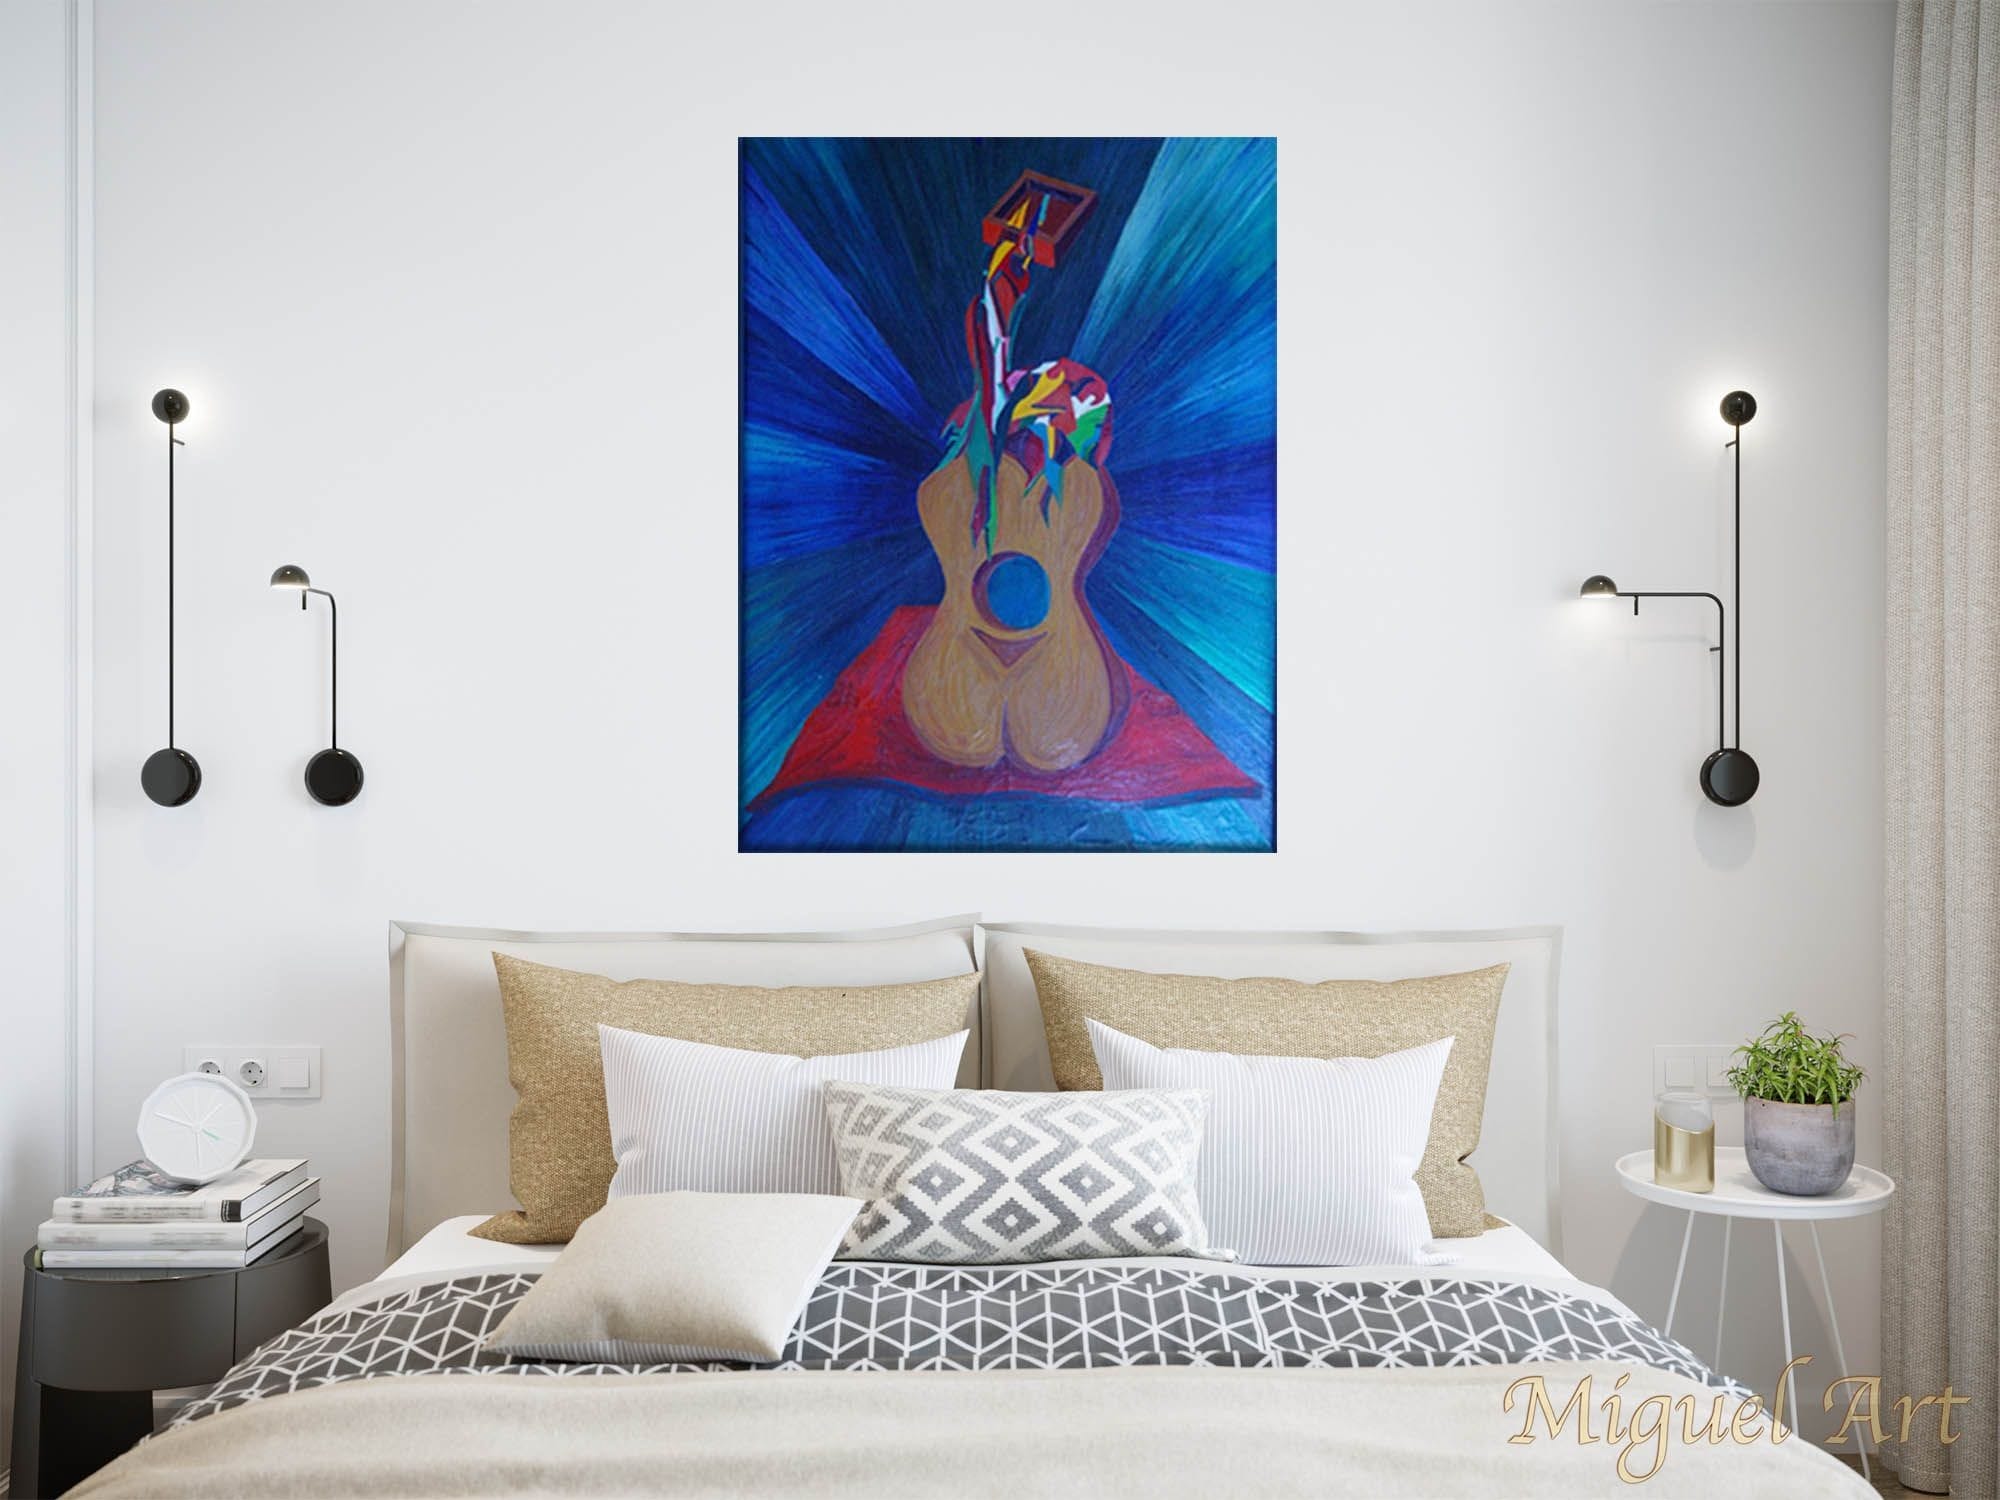 Painting of Guitar displayed on a white wall in a bedroom